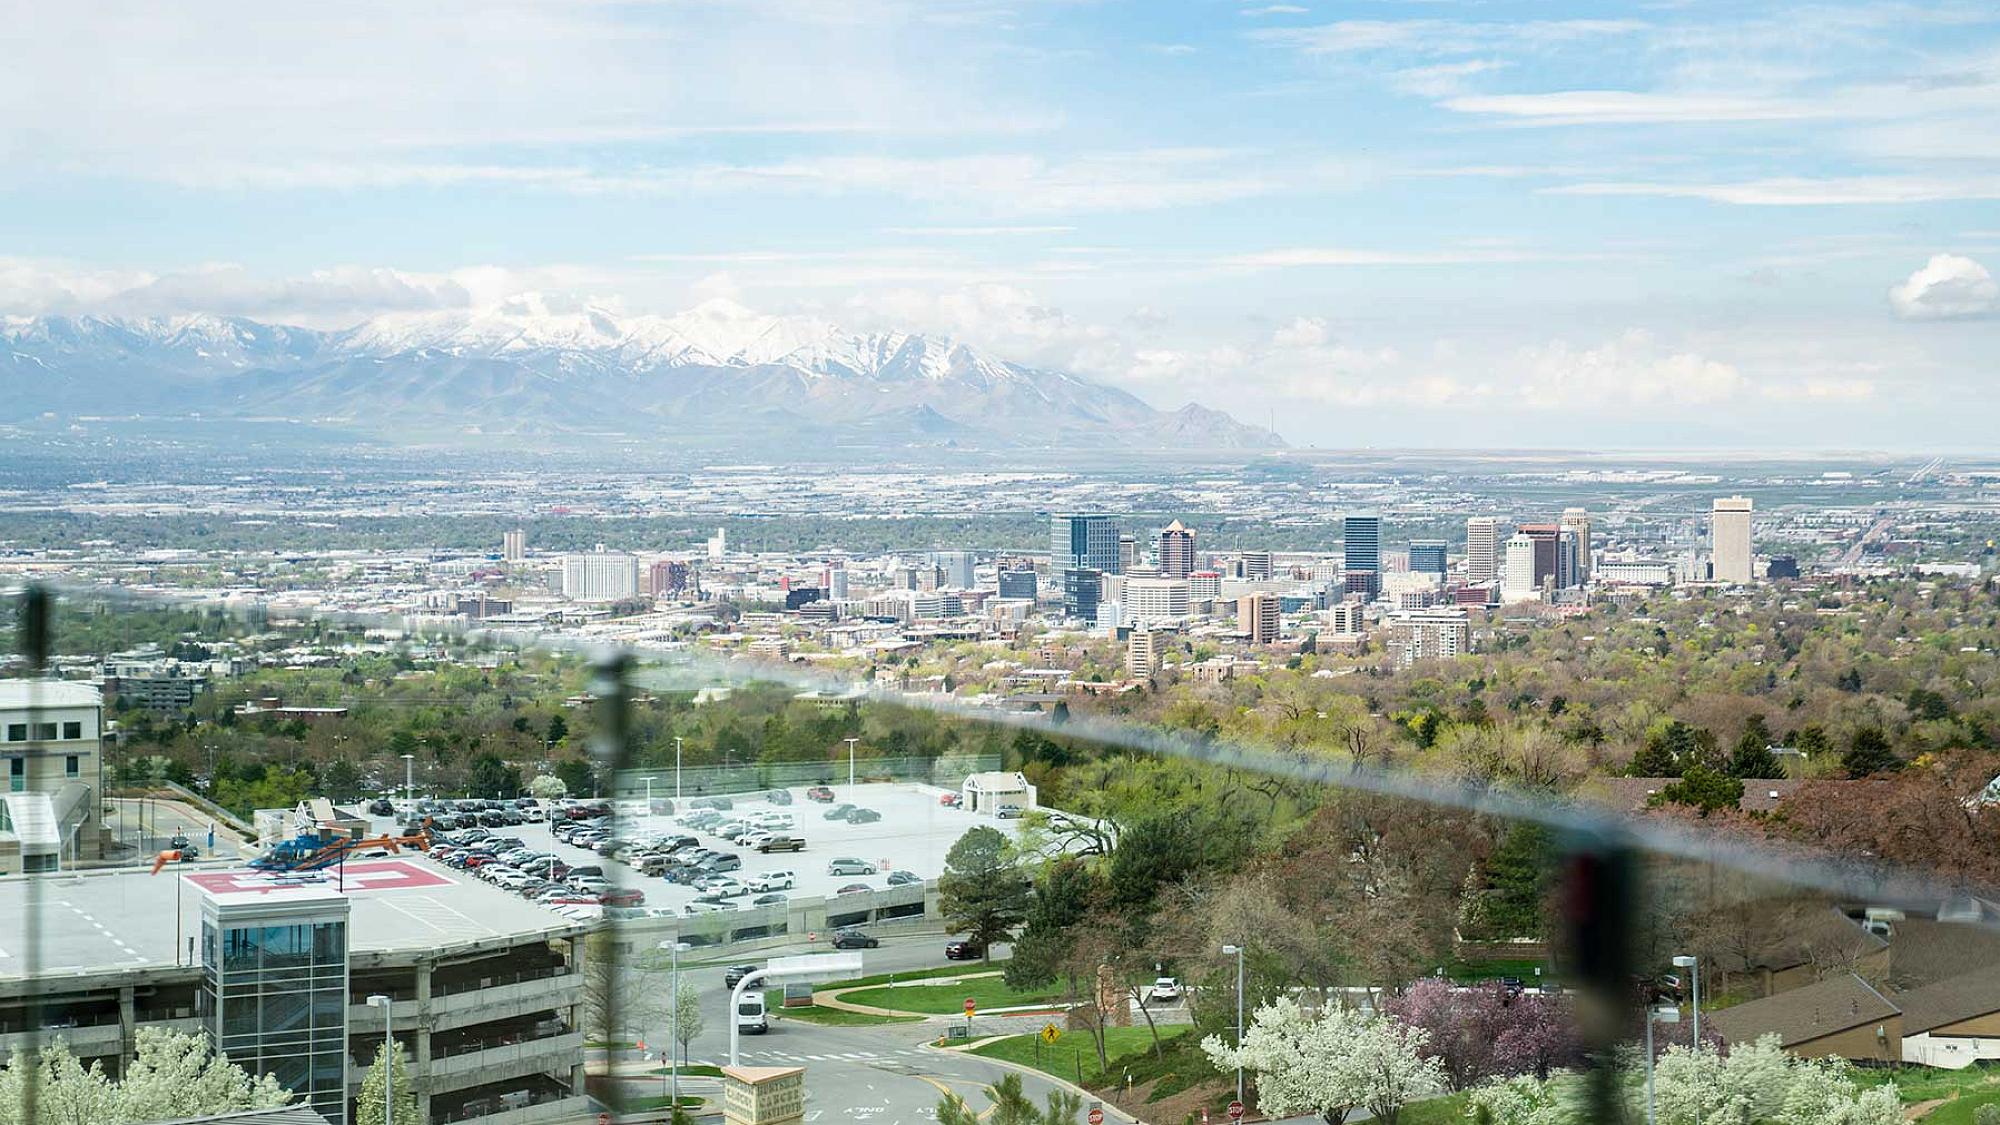 View from window in hospital showing the Salt Lake Valley